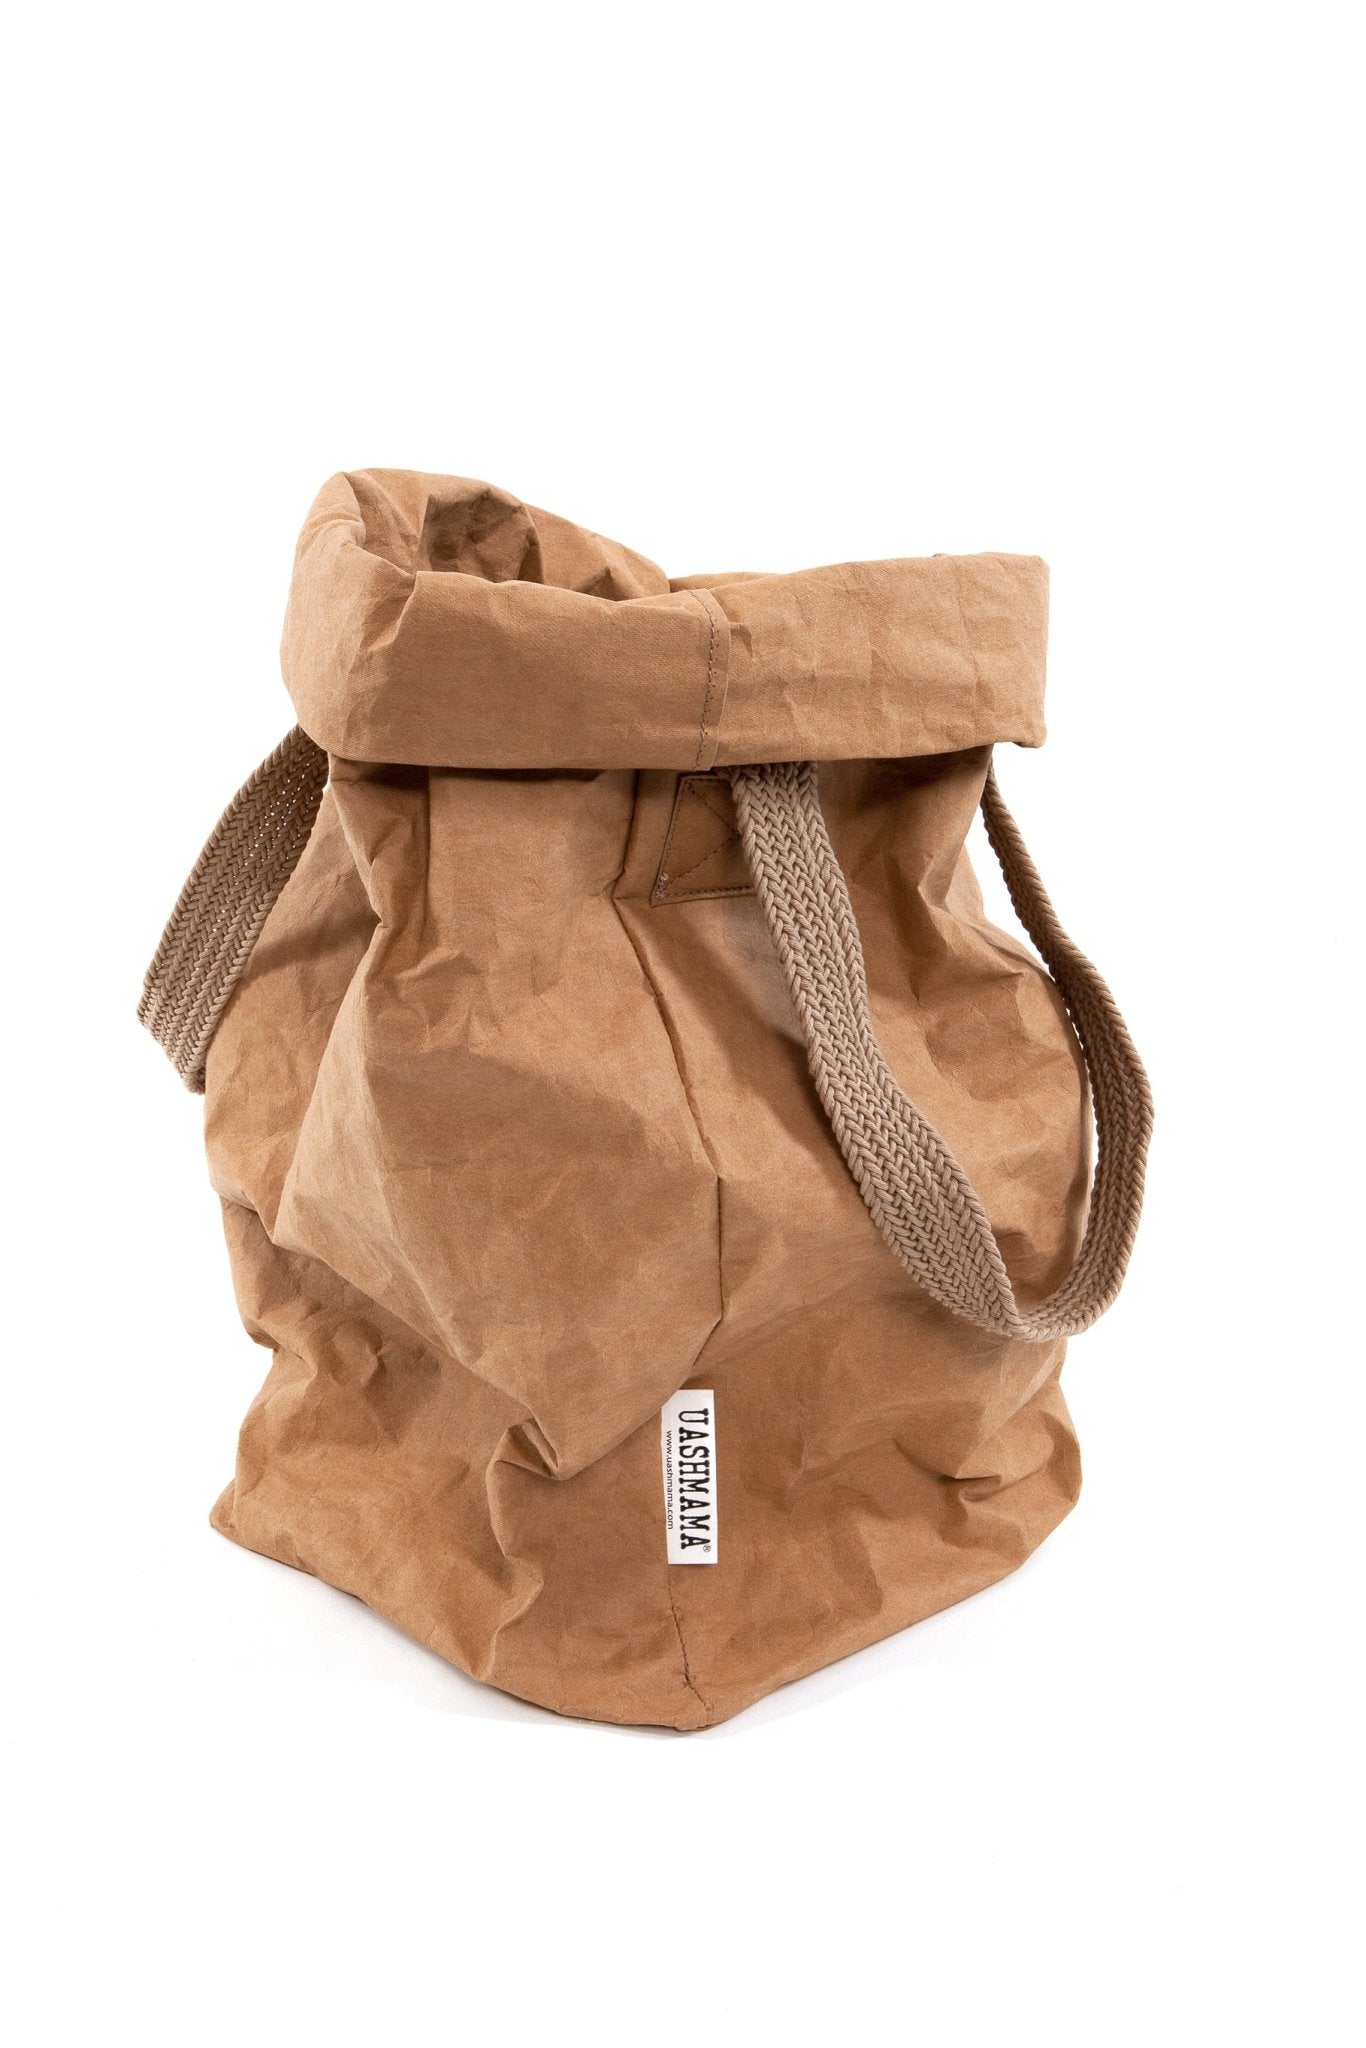 A natural tan coloured washable paper bag is shown from a 3/4 angle with the top rolled down. It features two brown cotton handles and a natural toned UASHMAMA logo tab at the left hand side.